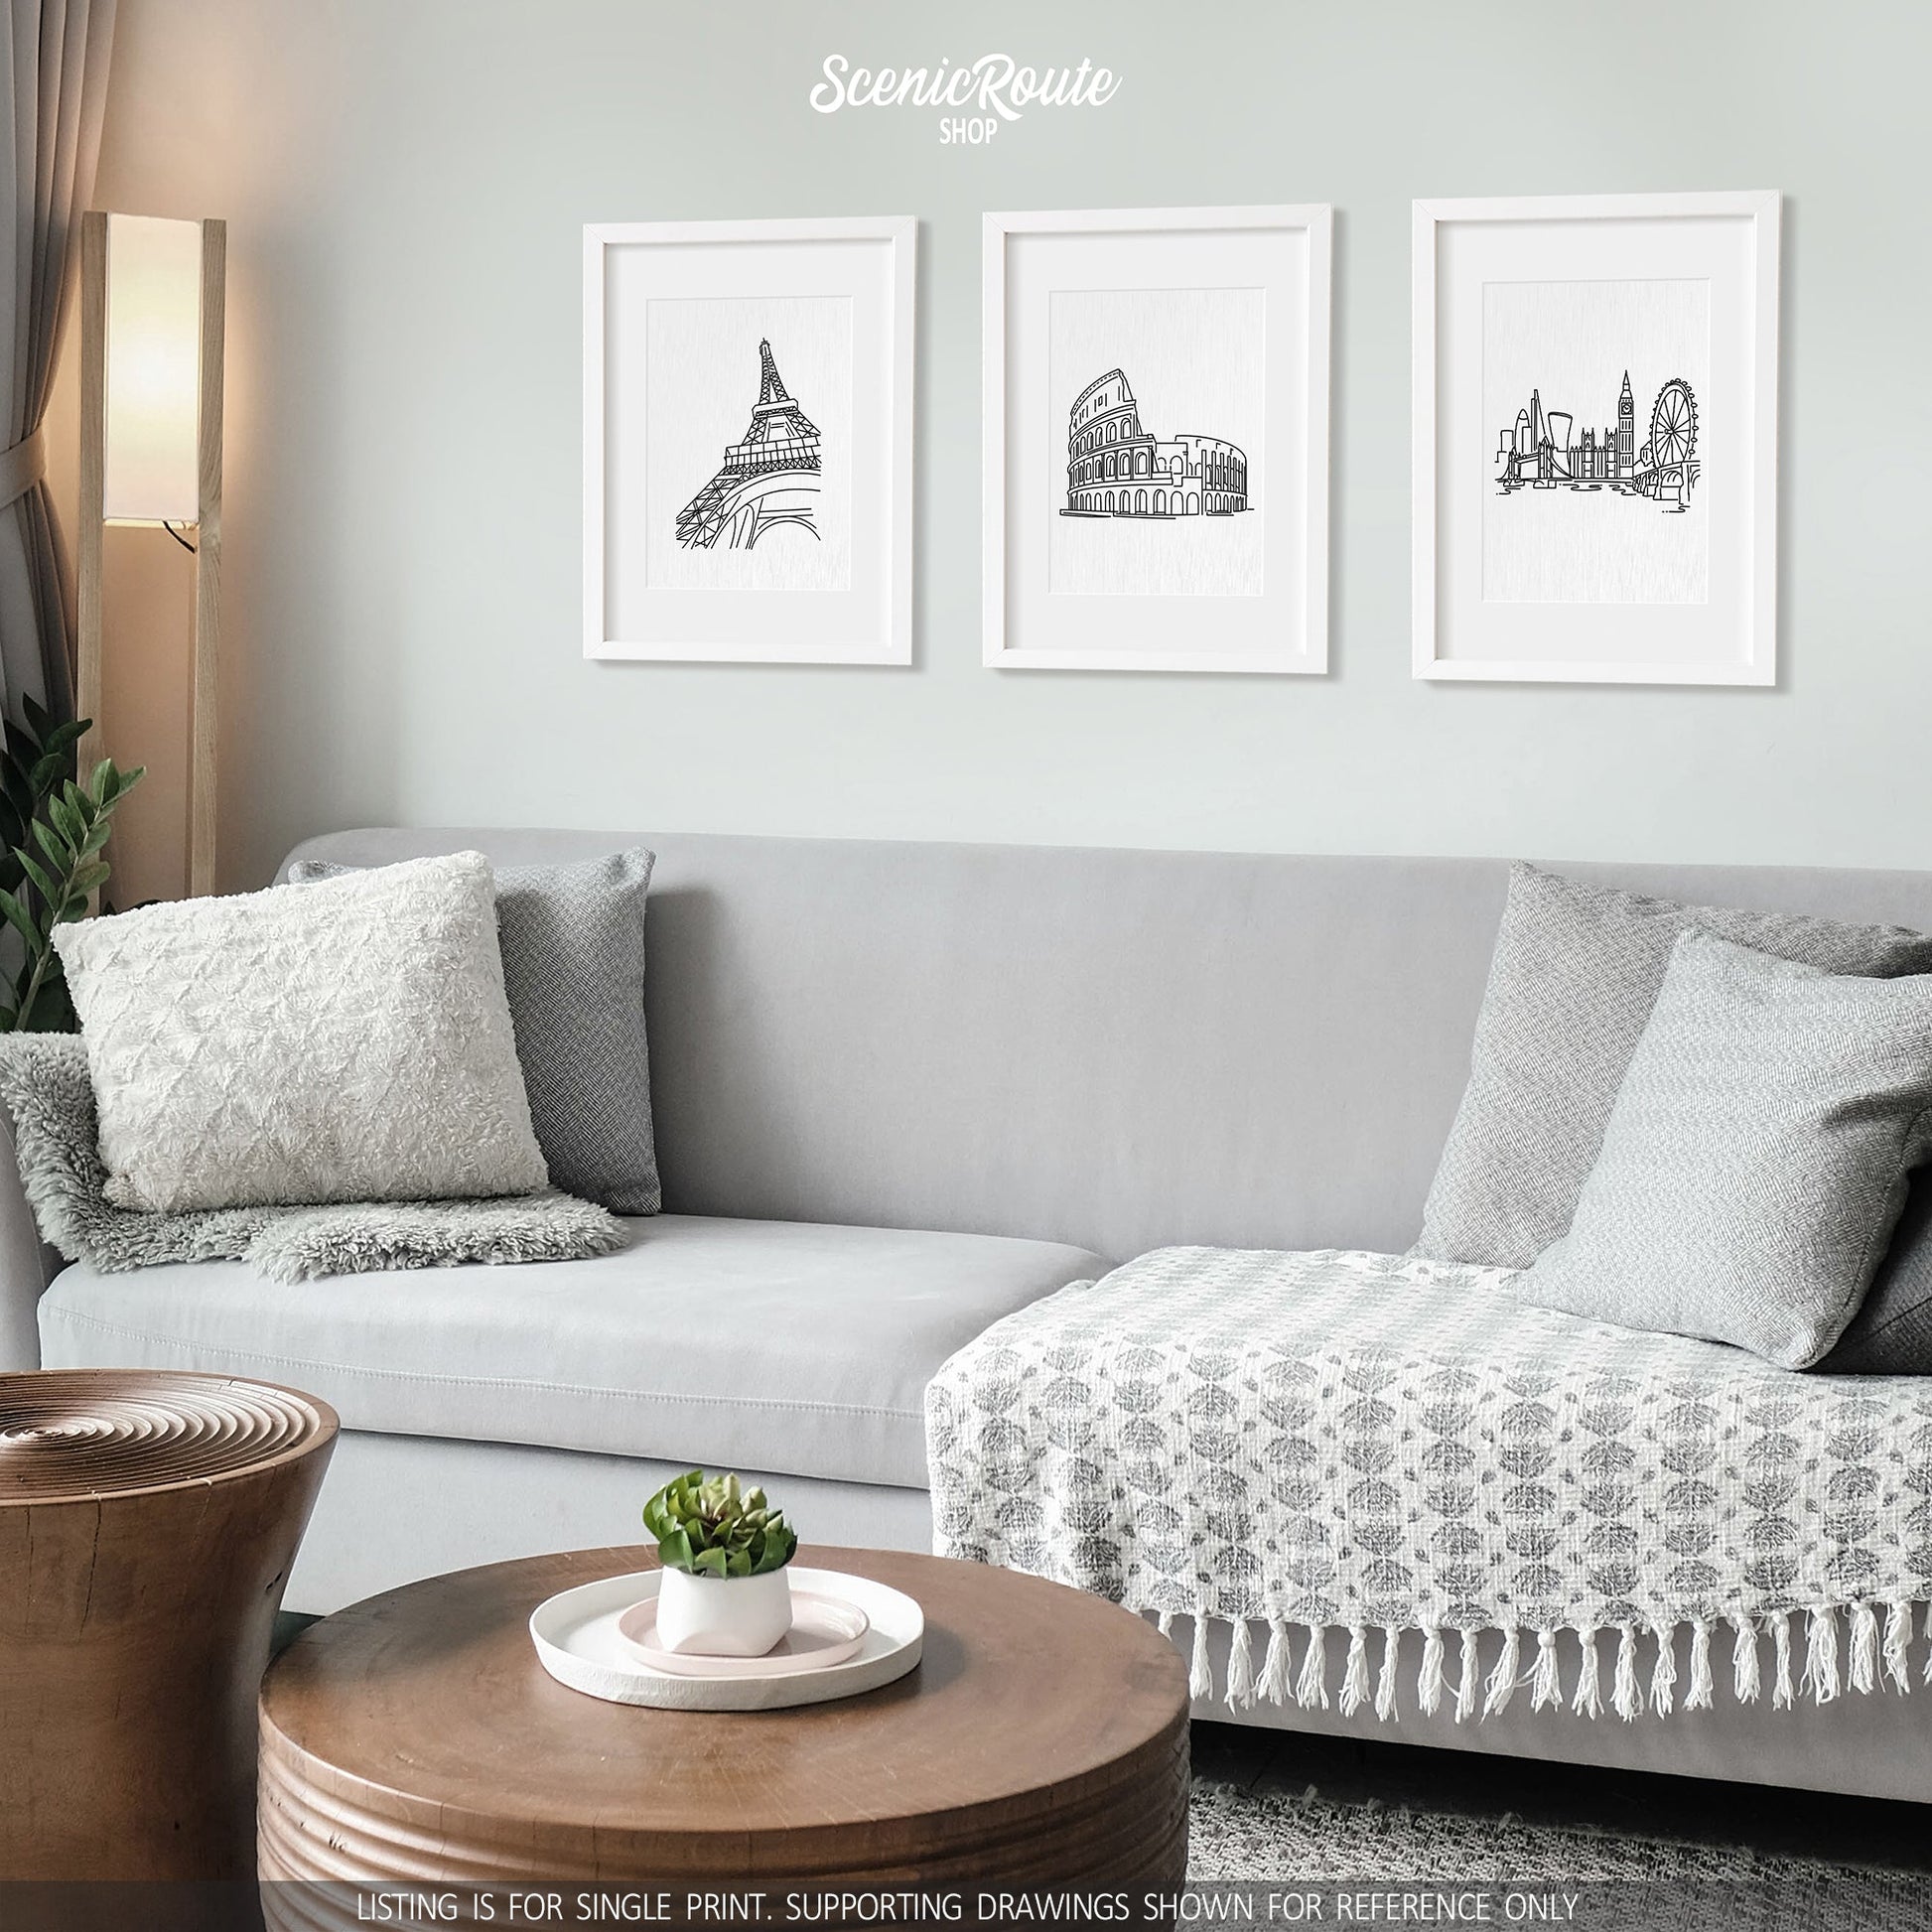 A group of three framed drawings on a white wall hanging above a couch with pillows and a blanket. The line art drawings include the Eiffel Tower, Colosseum, and the London Skyline